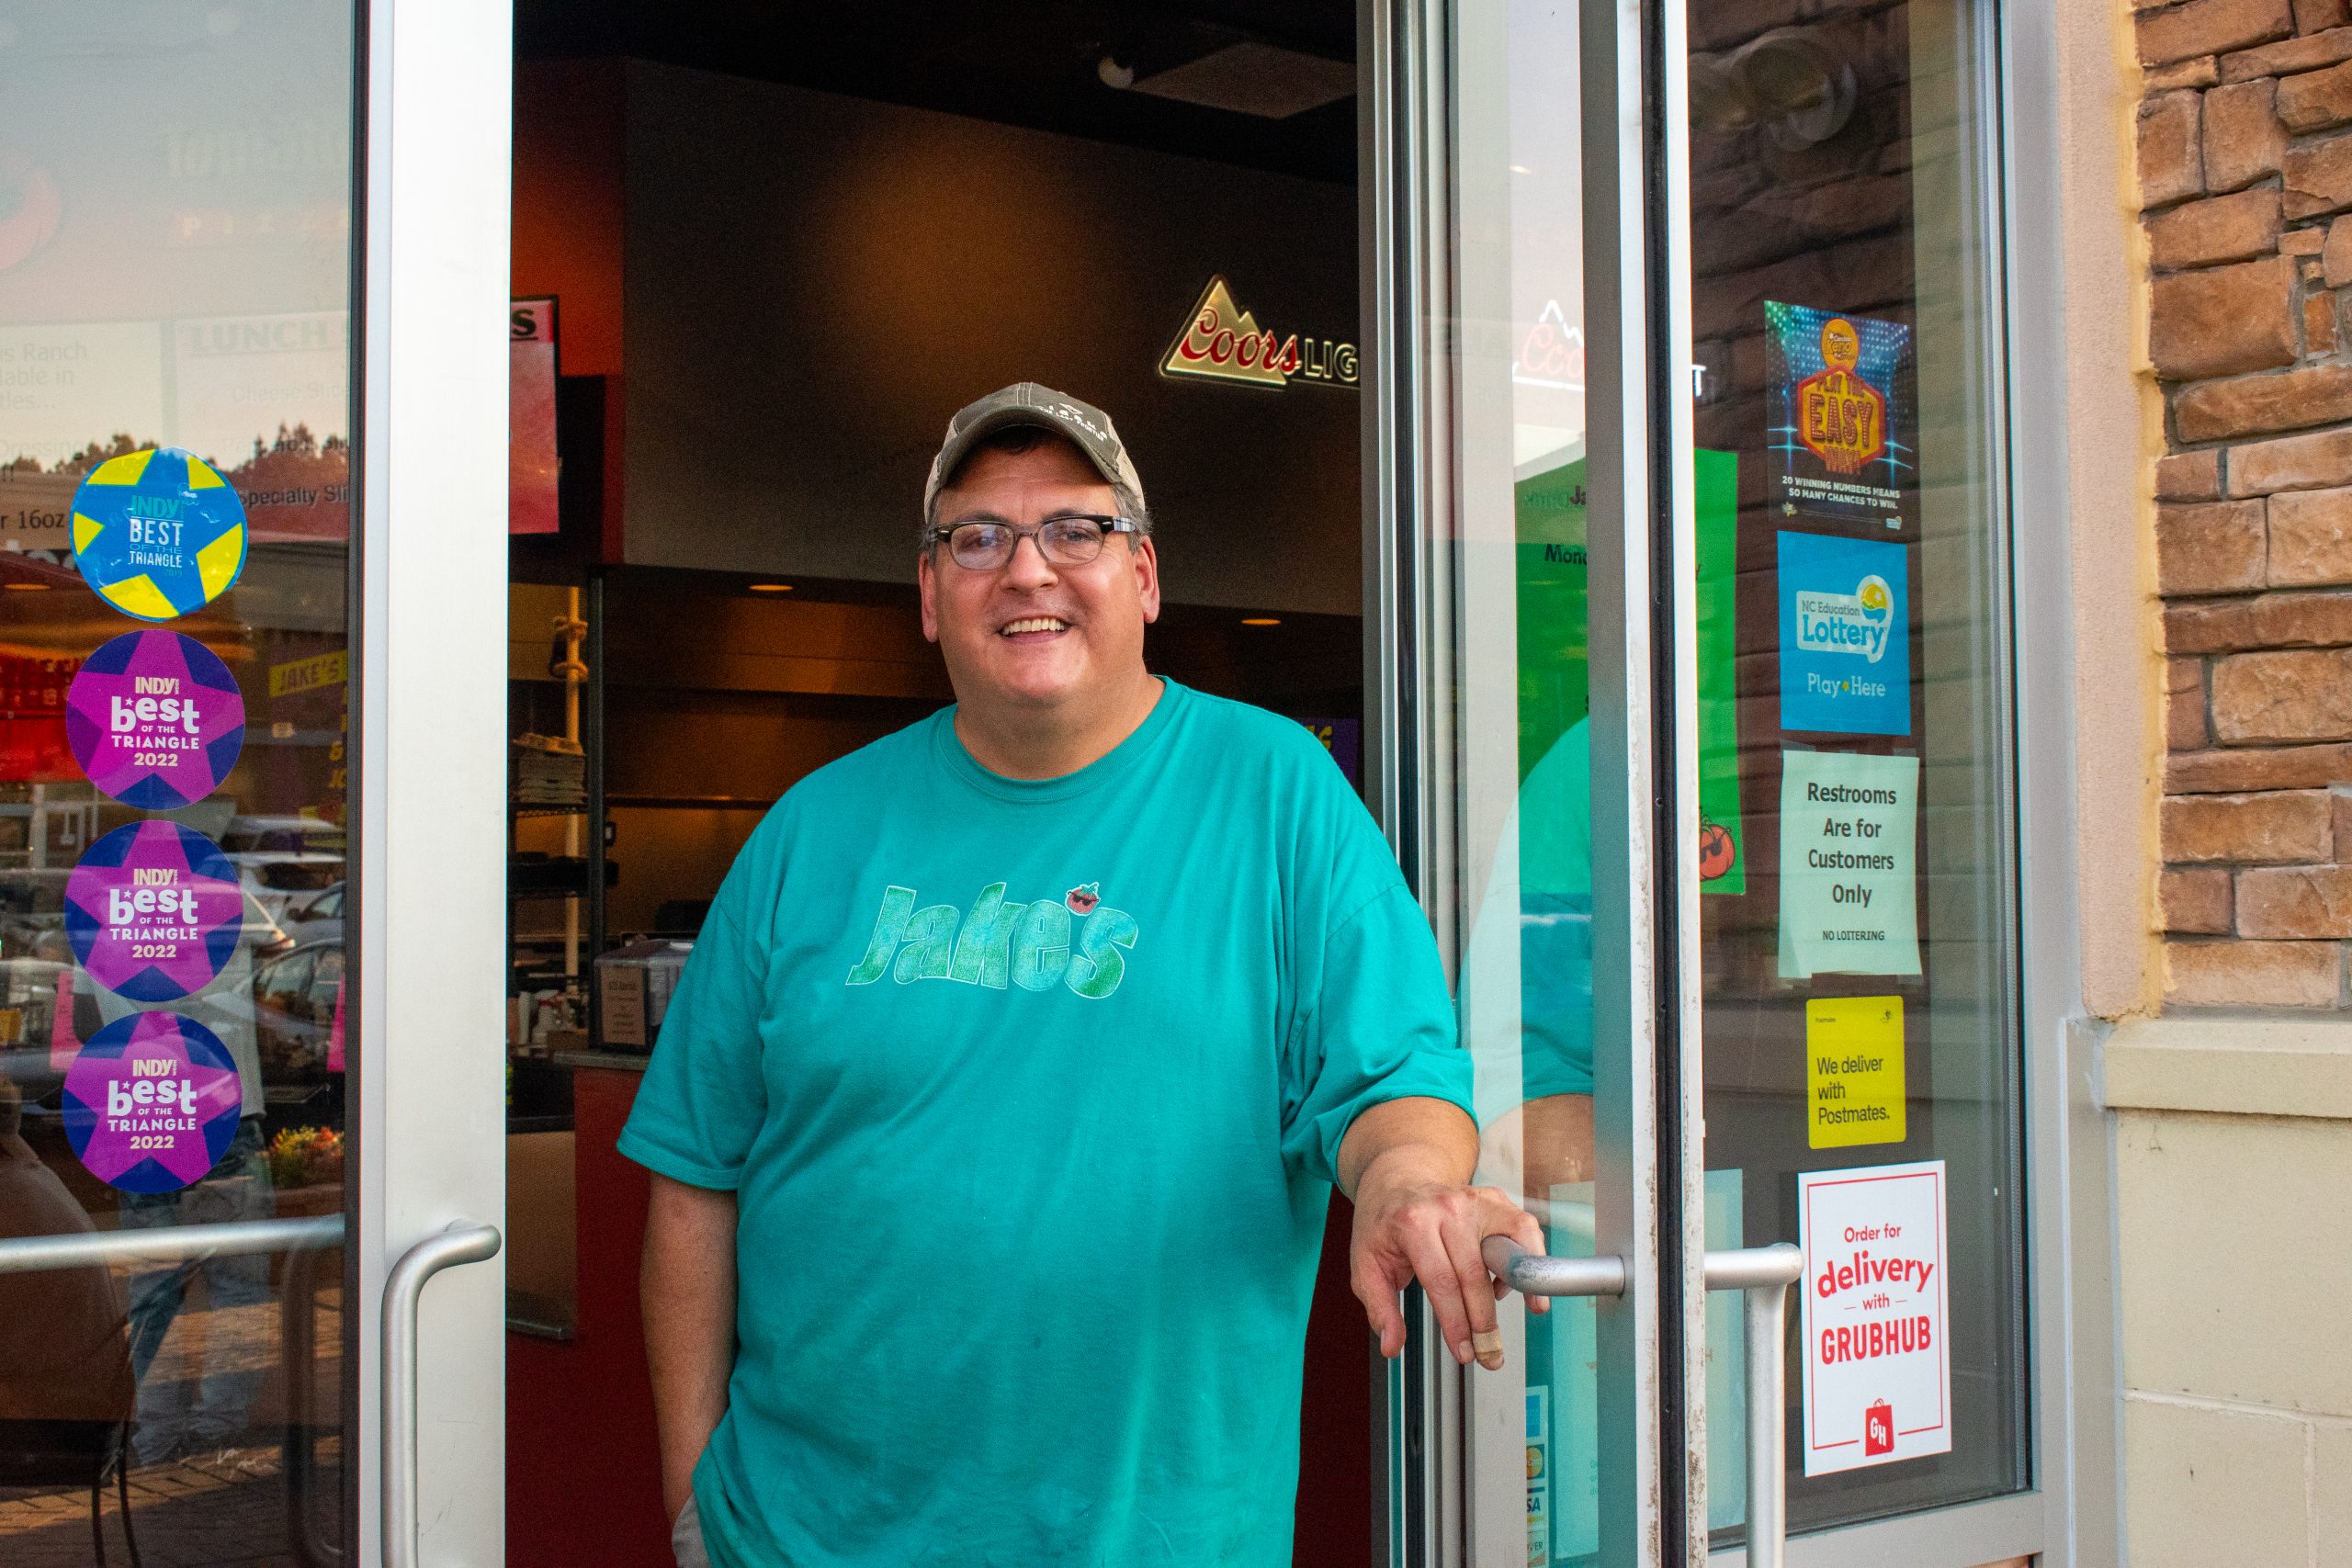 A photo of Glen Gordon, owner of Tomato Jake's Pizzeria, standing in the doorway of his restaurant in Durham, NC.